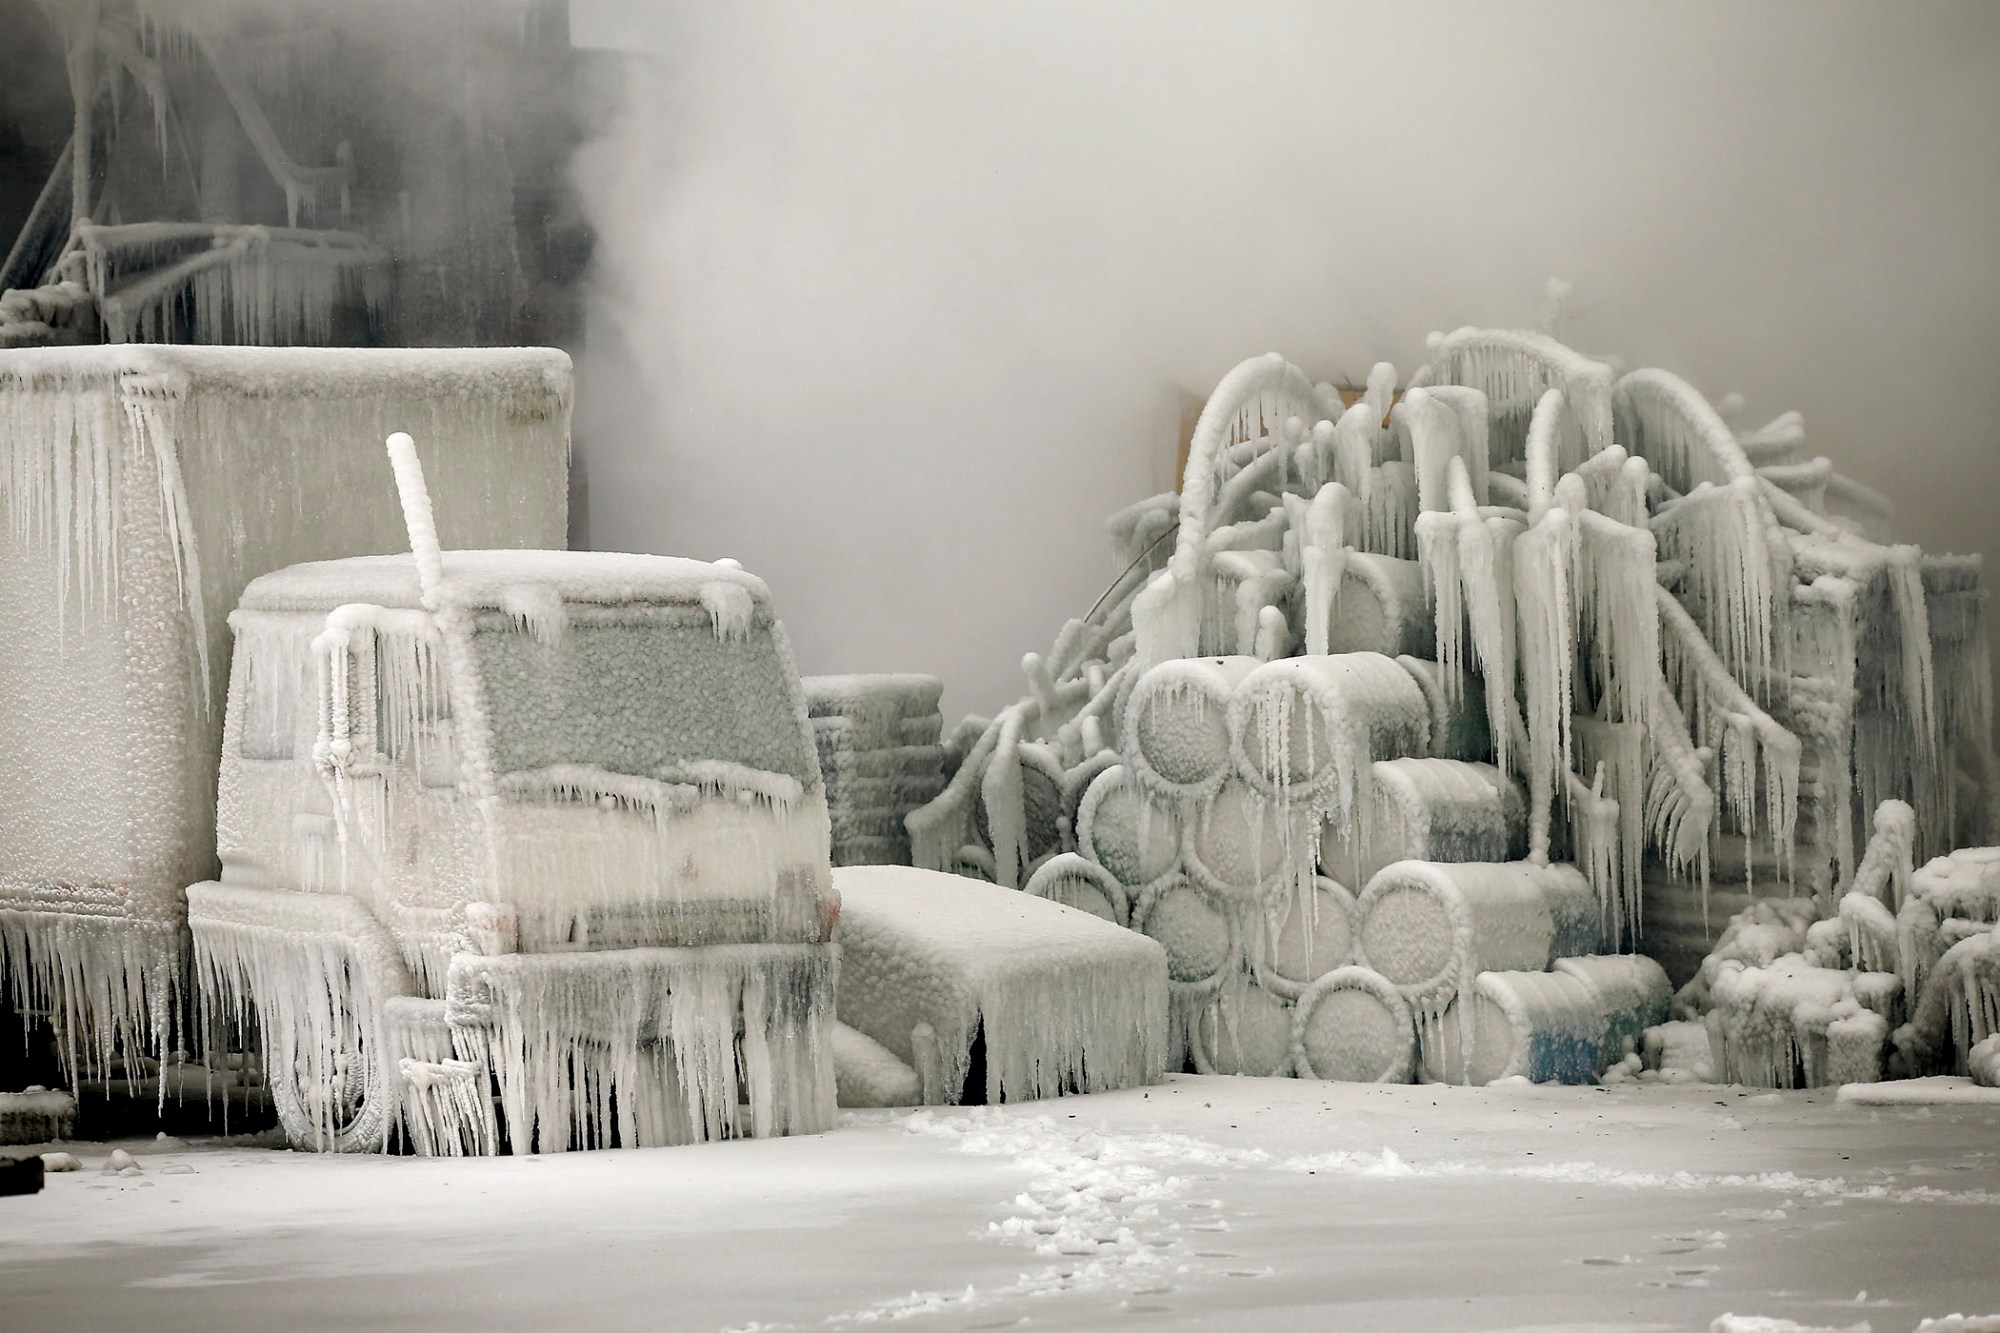 A truck is covered in ice as firefighters help to extinguish a massive blaze at a vacant warehouse on January 23, 2013 in Chicago. More than 200 firefighters battled a five-alarm fire as temperatures were in the single digits.